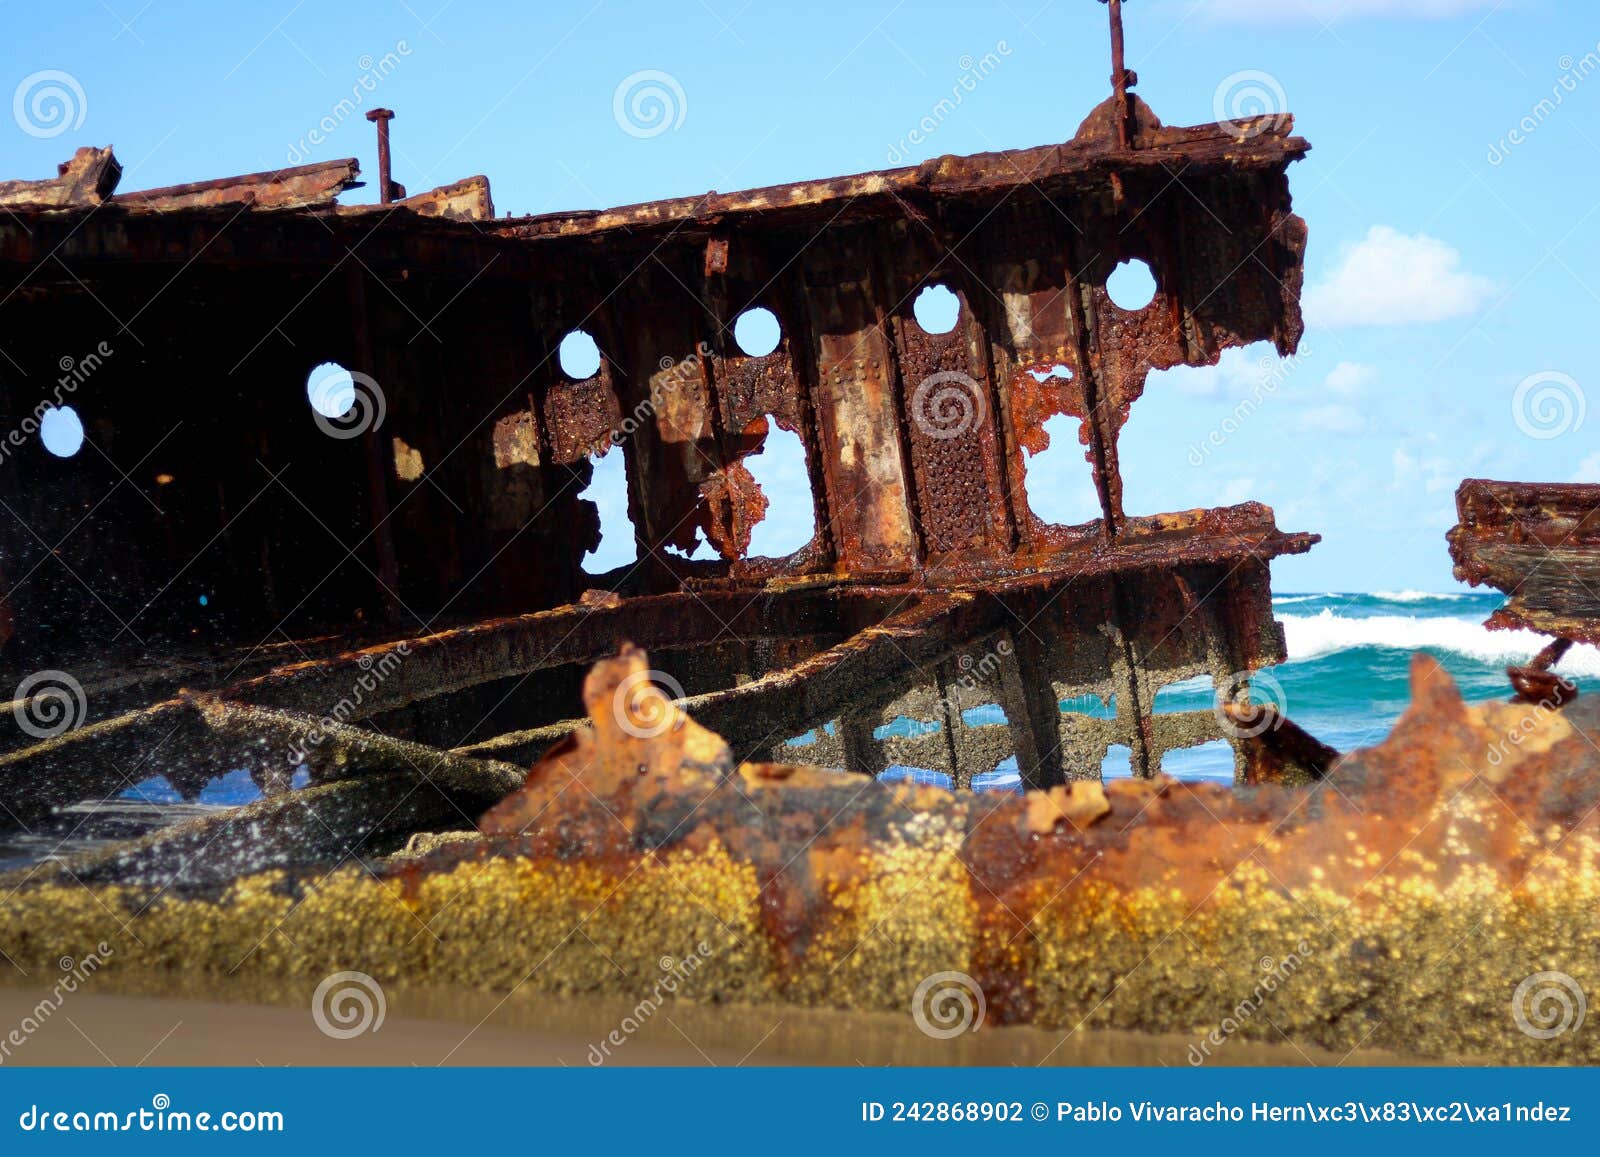 wreckage of a rusted sunken ship stranded on the sand of australia